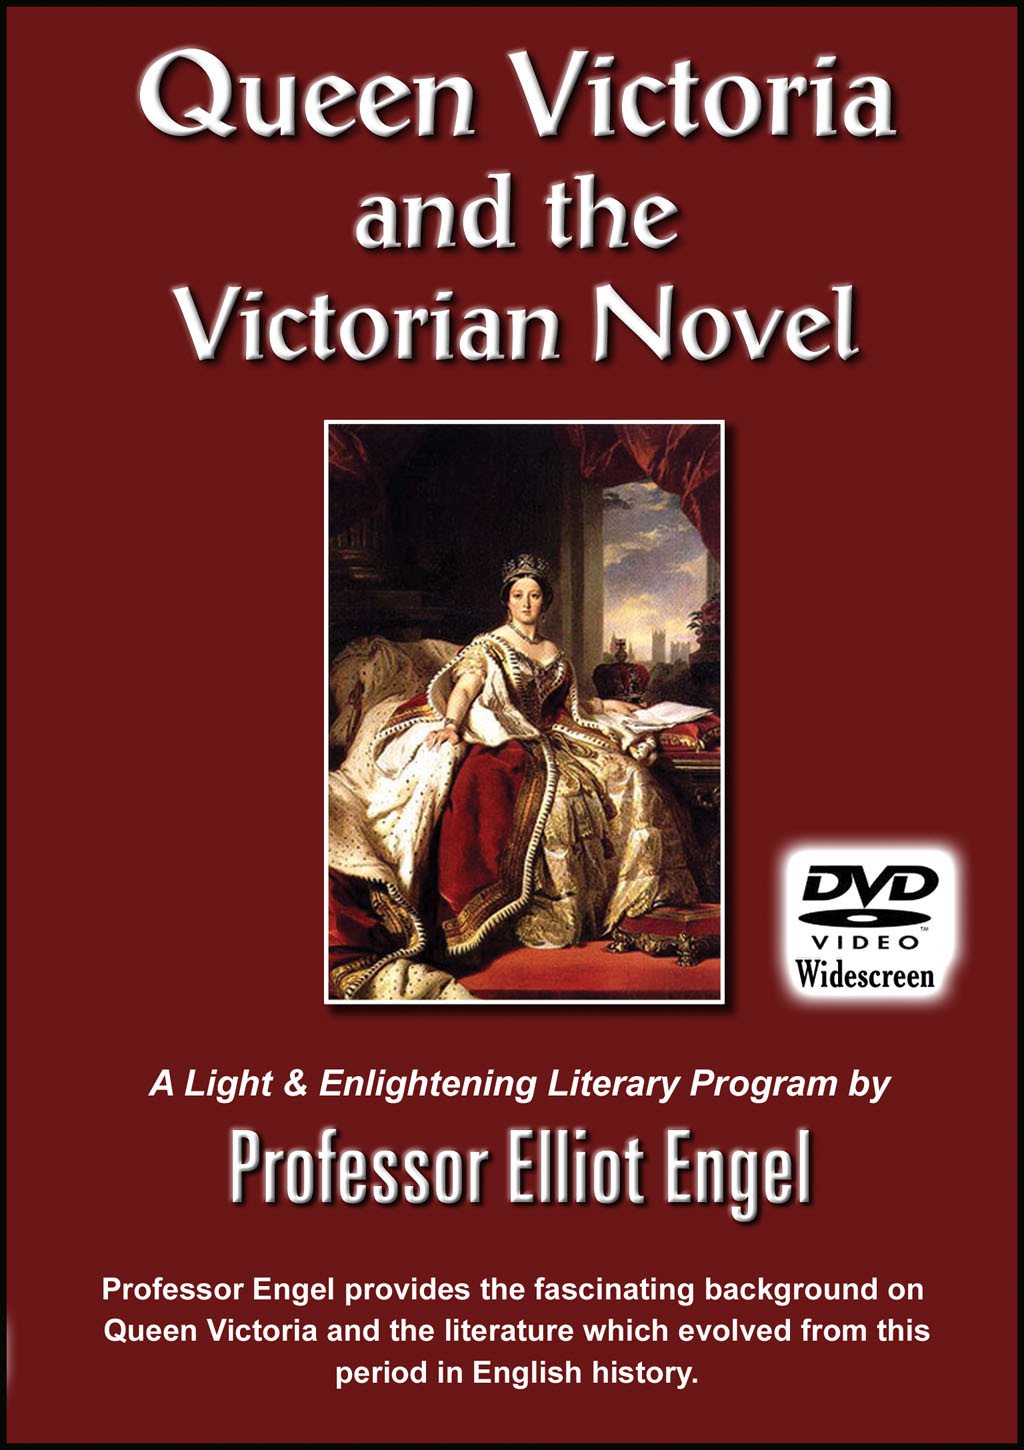 Queen Victoria and the Victorian Novel